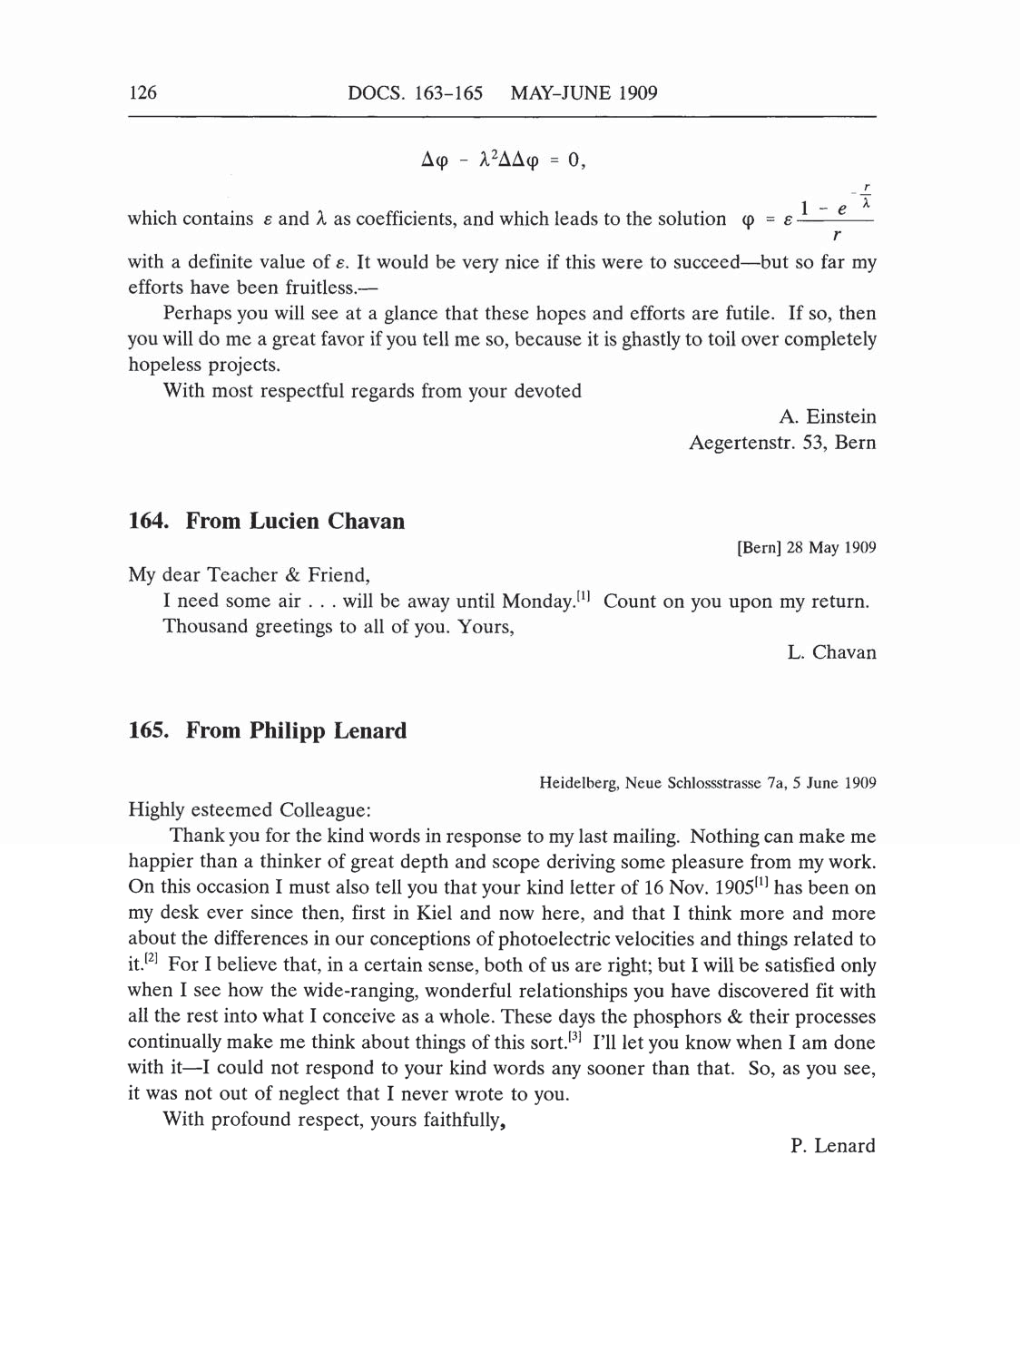 Volume 5: The Swiss Years: Correspondence, 1902-1914 (English translation supplement) page 126